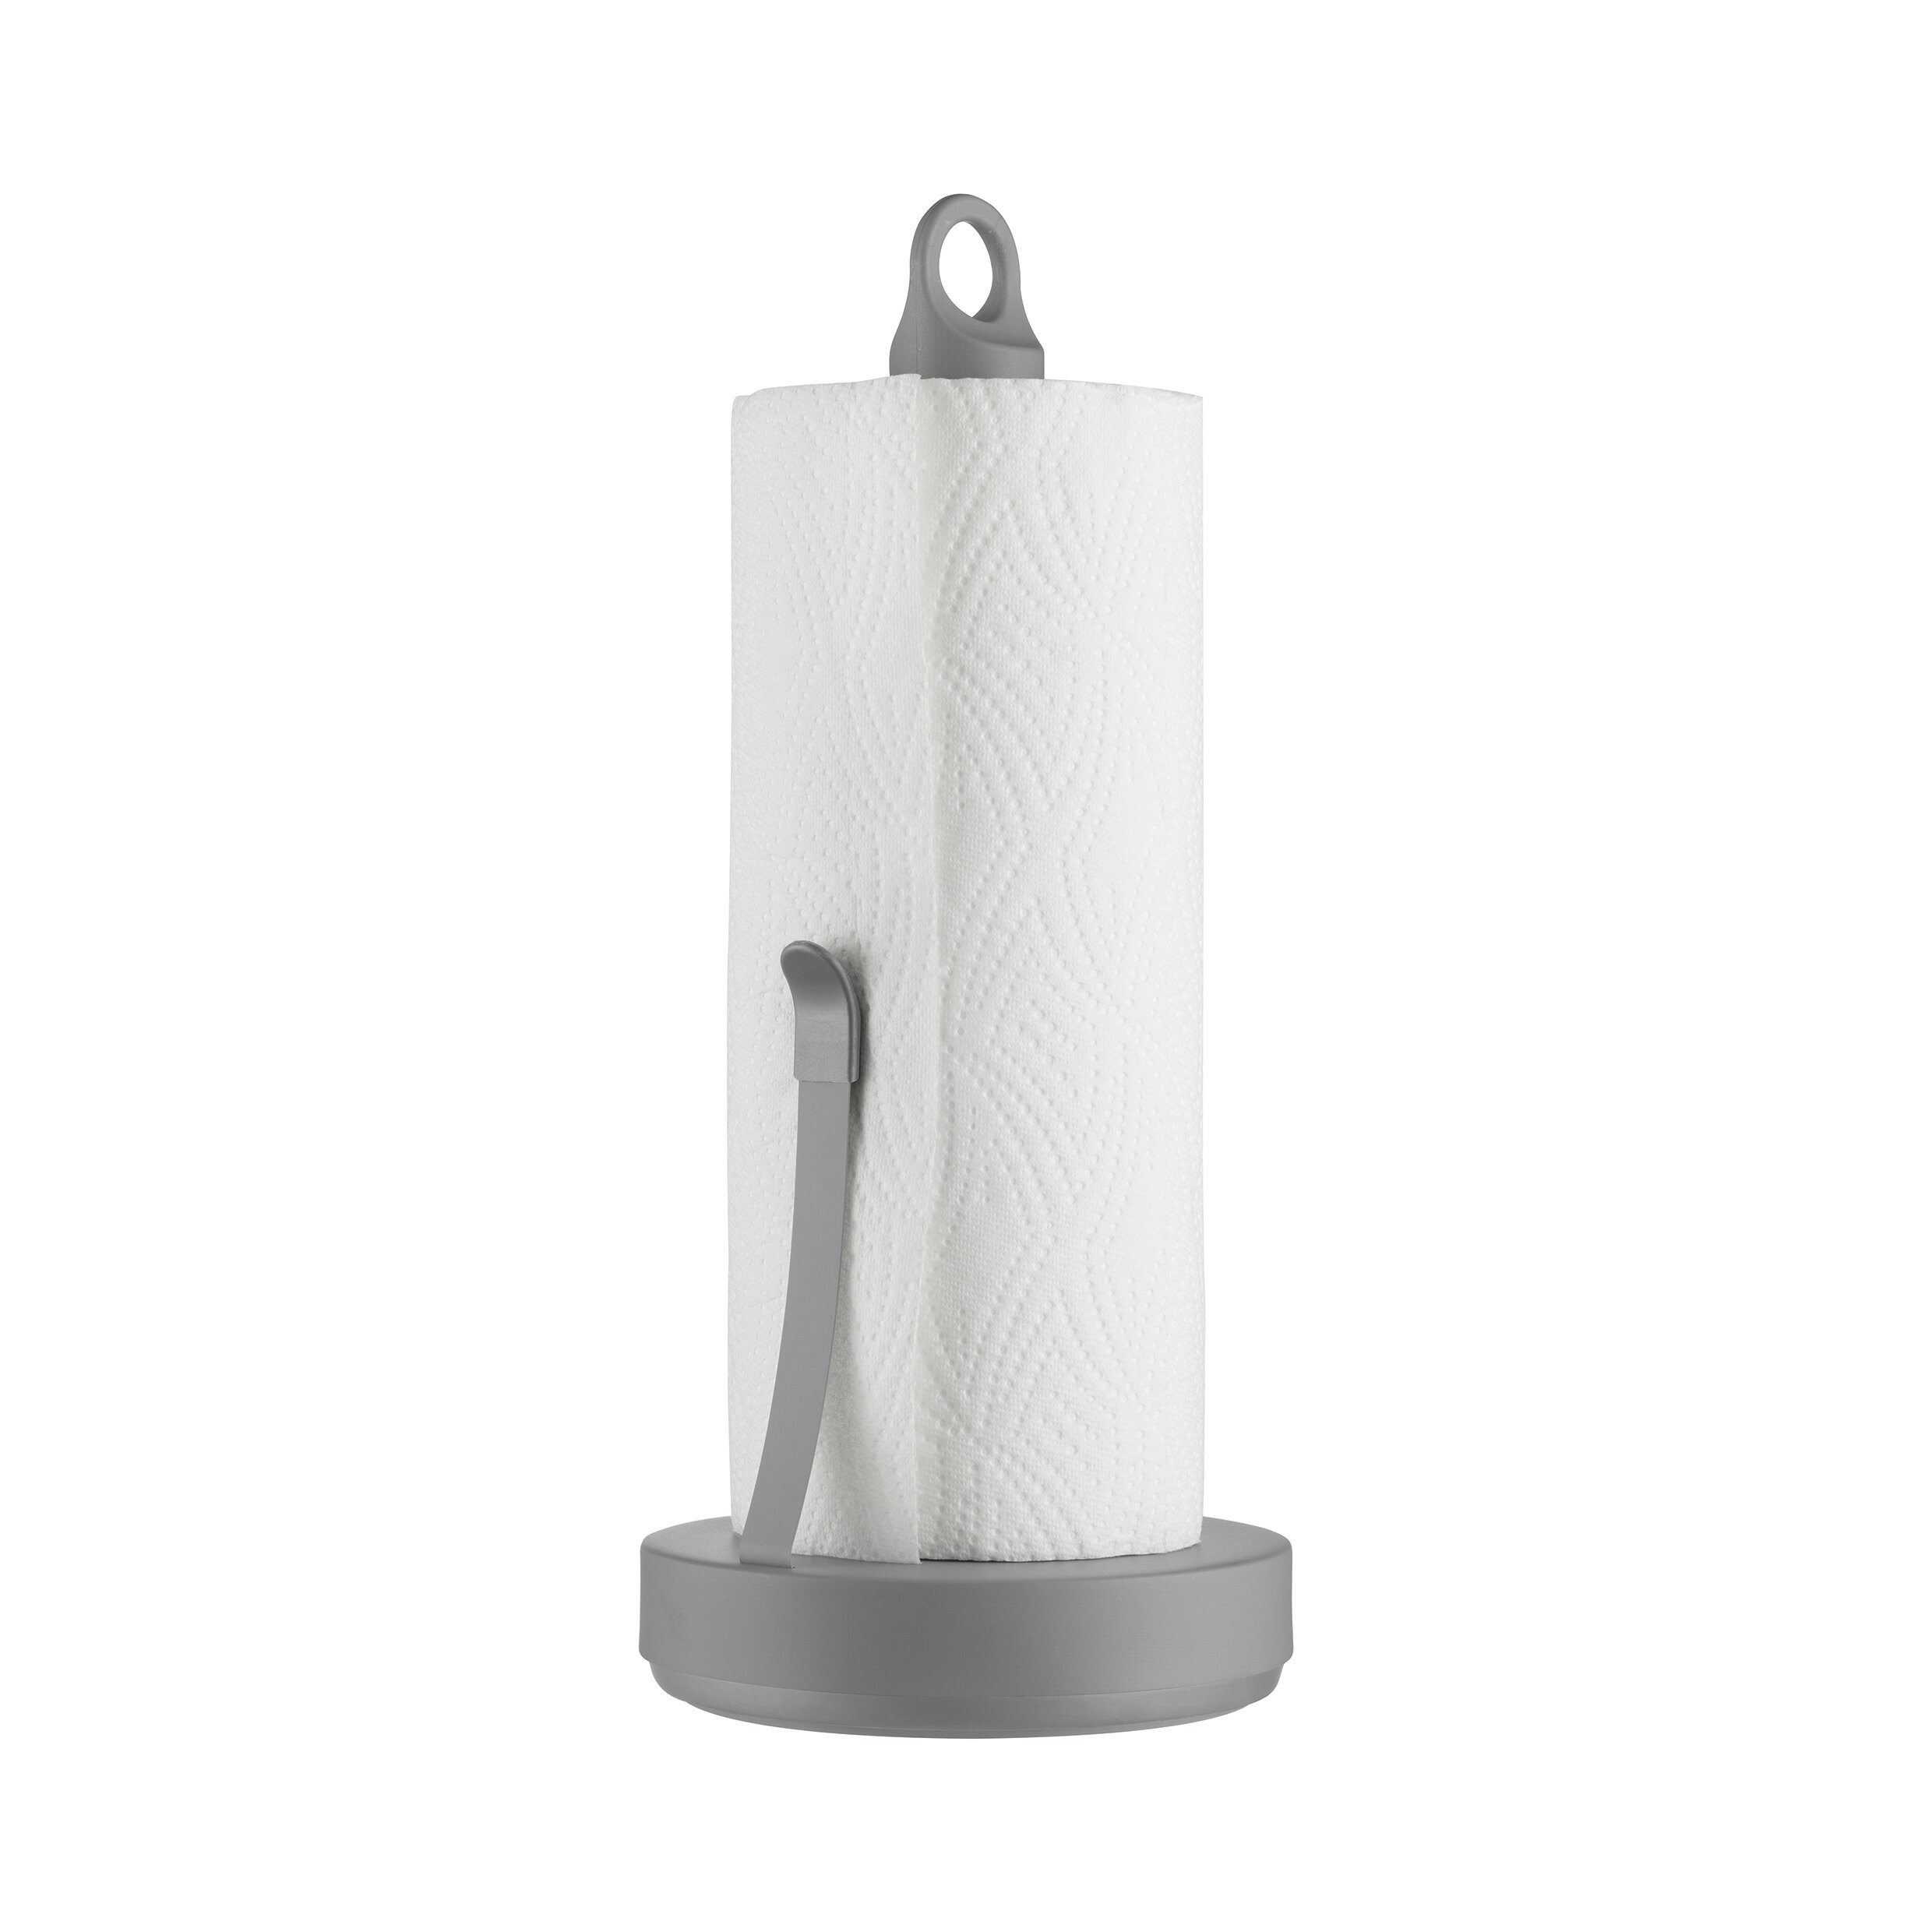 simplehuman Stainless Steel Wall Mount Paper Towel Holder